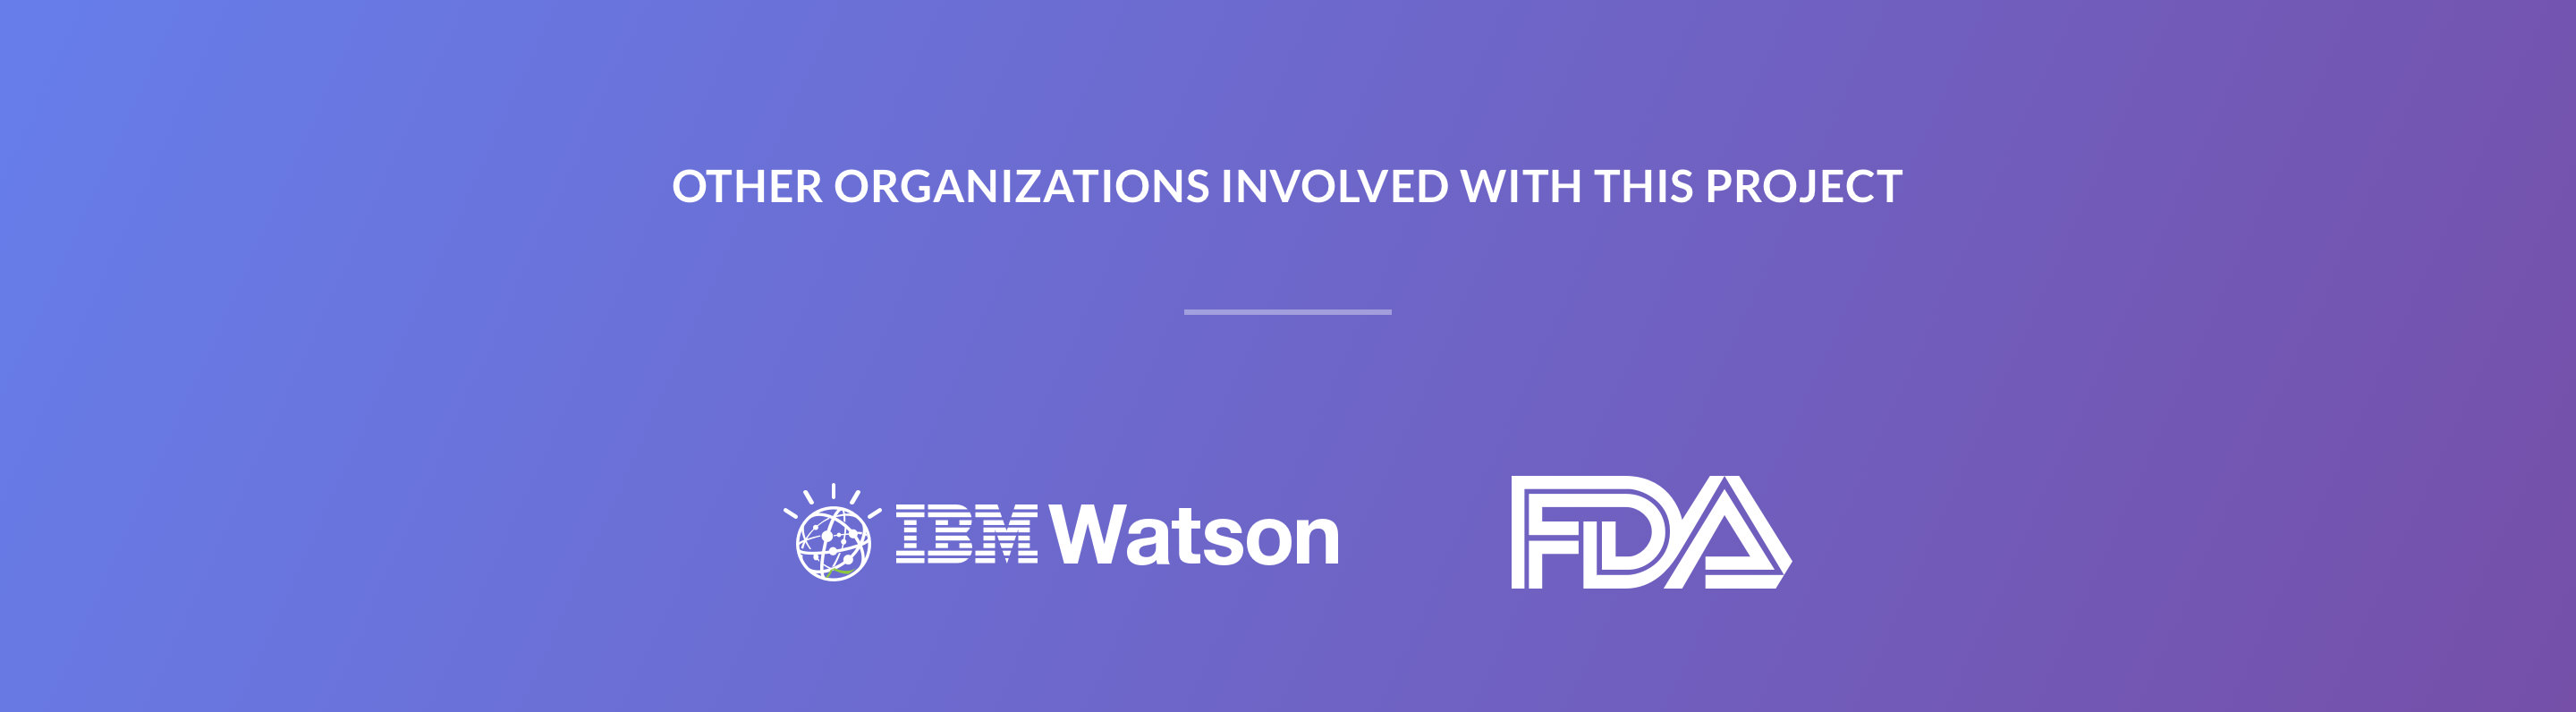 Other organizations involved with this project: IBM Watson, FDA.